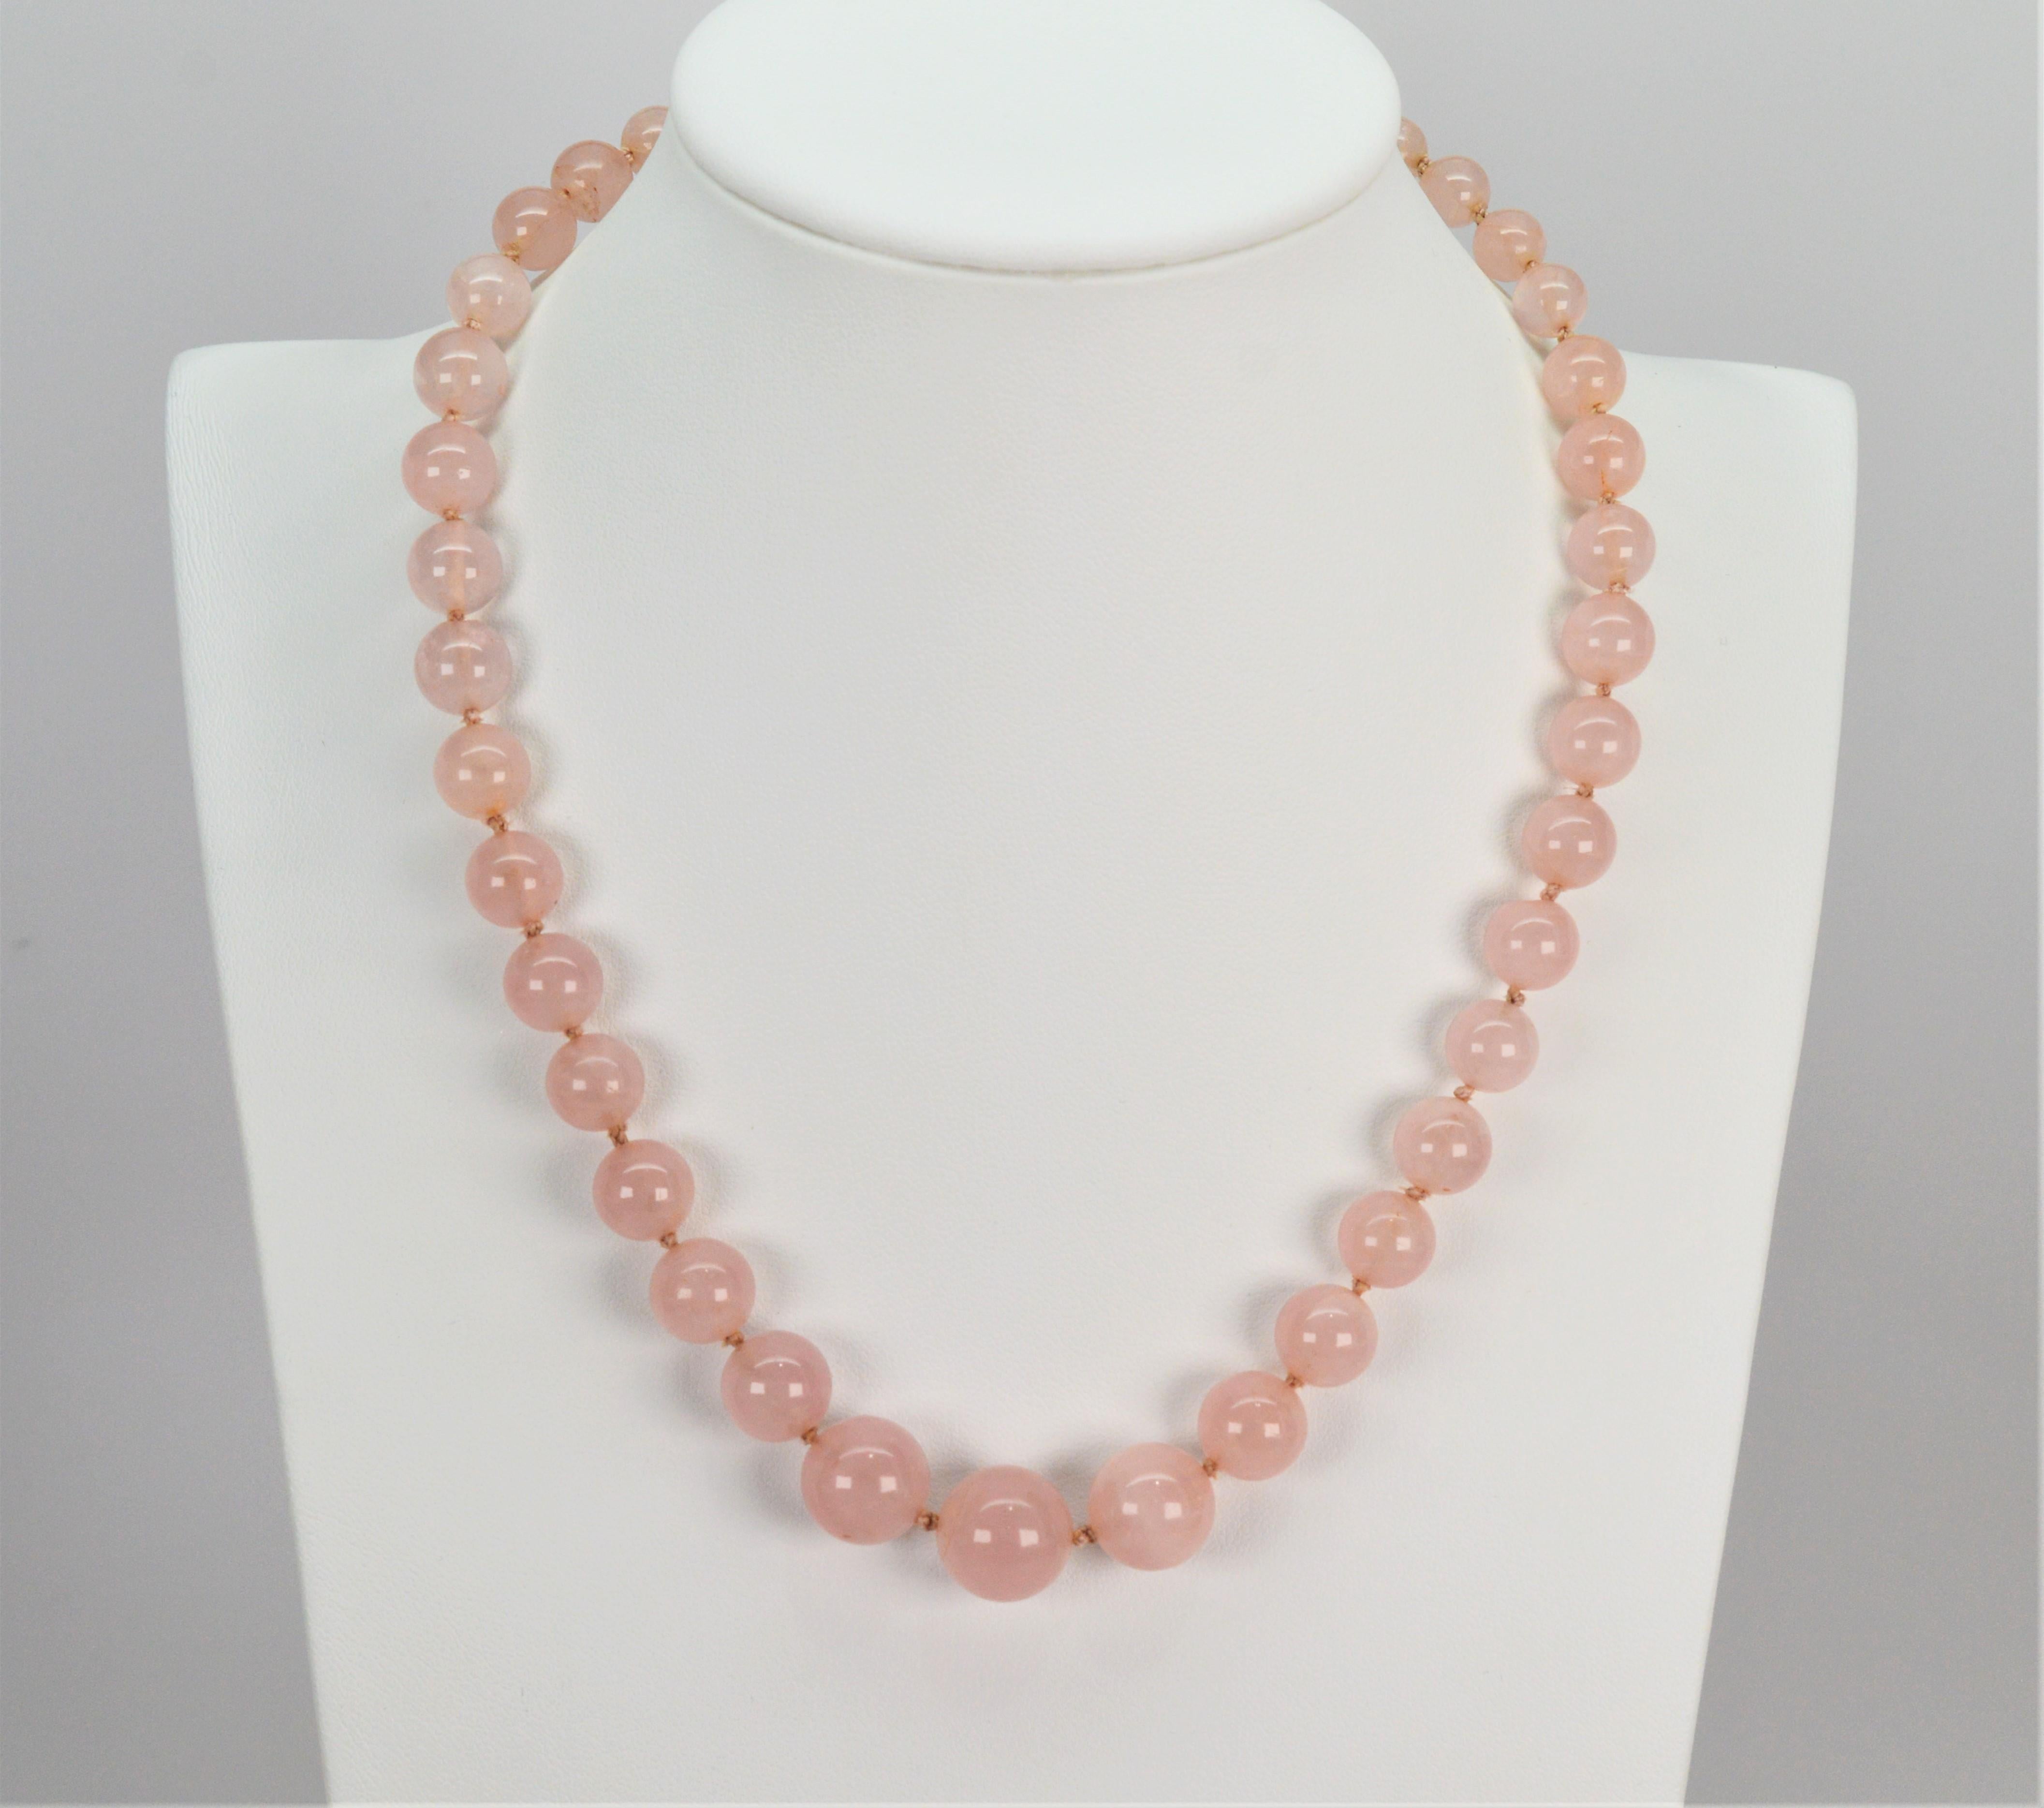 Vintage Rose Quartz Beaded Necklace w 14K Yellow Gold Clasp In Good Condition For Sale In Mount Kisco, NY